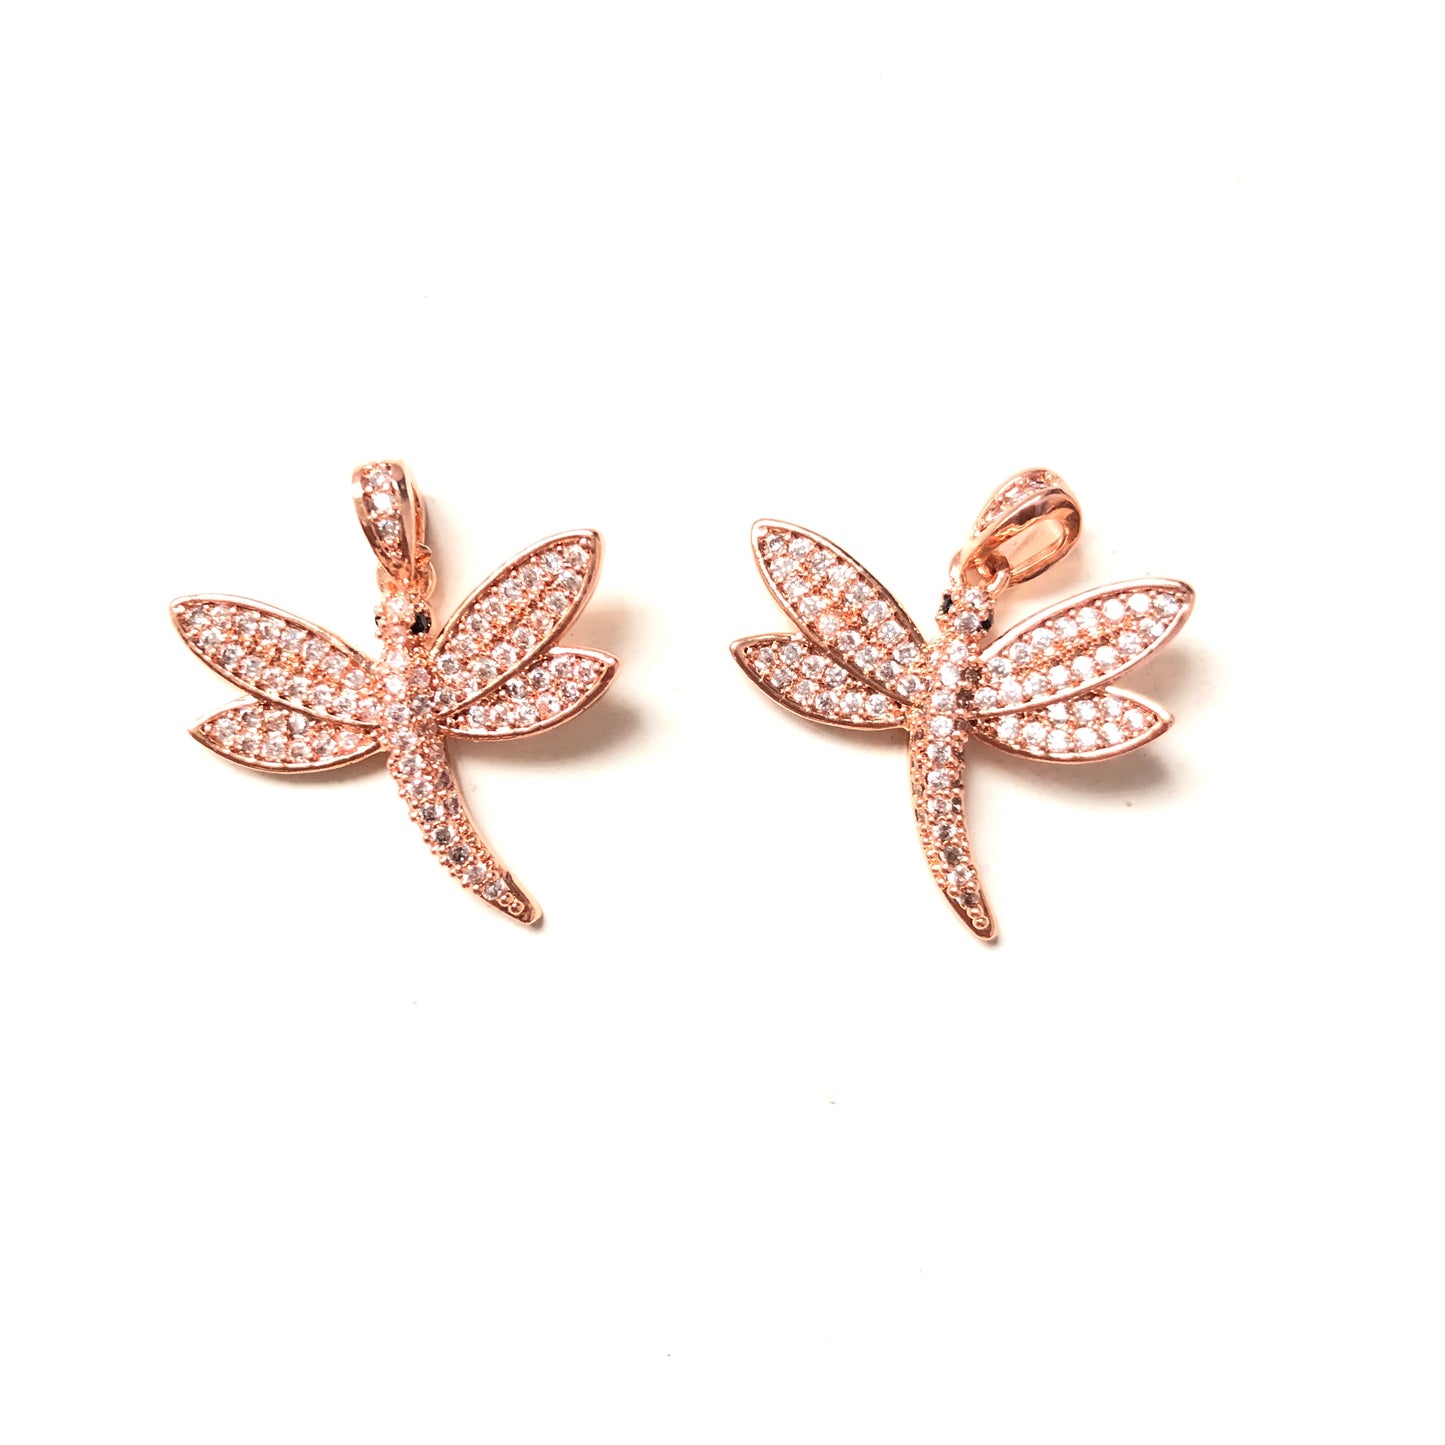 10pcs/lot 23.5*21.5mm CZ Paved Dragonfly Charms Rose Gold CZ Paved Charms Animals & Insects Charms Beads Beyond